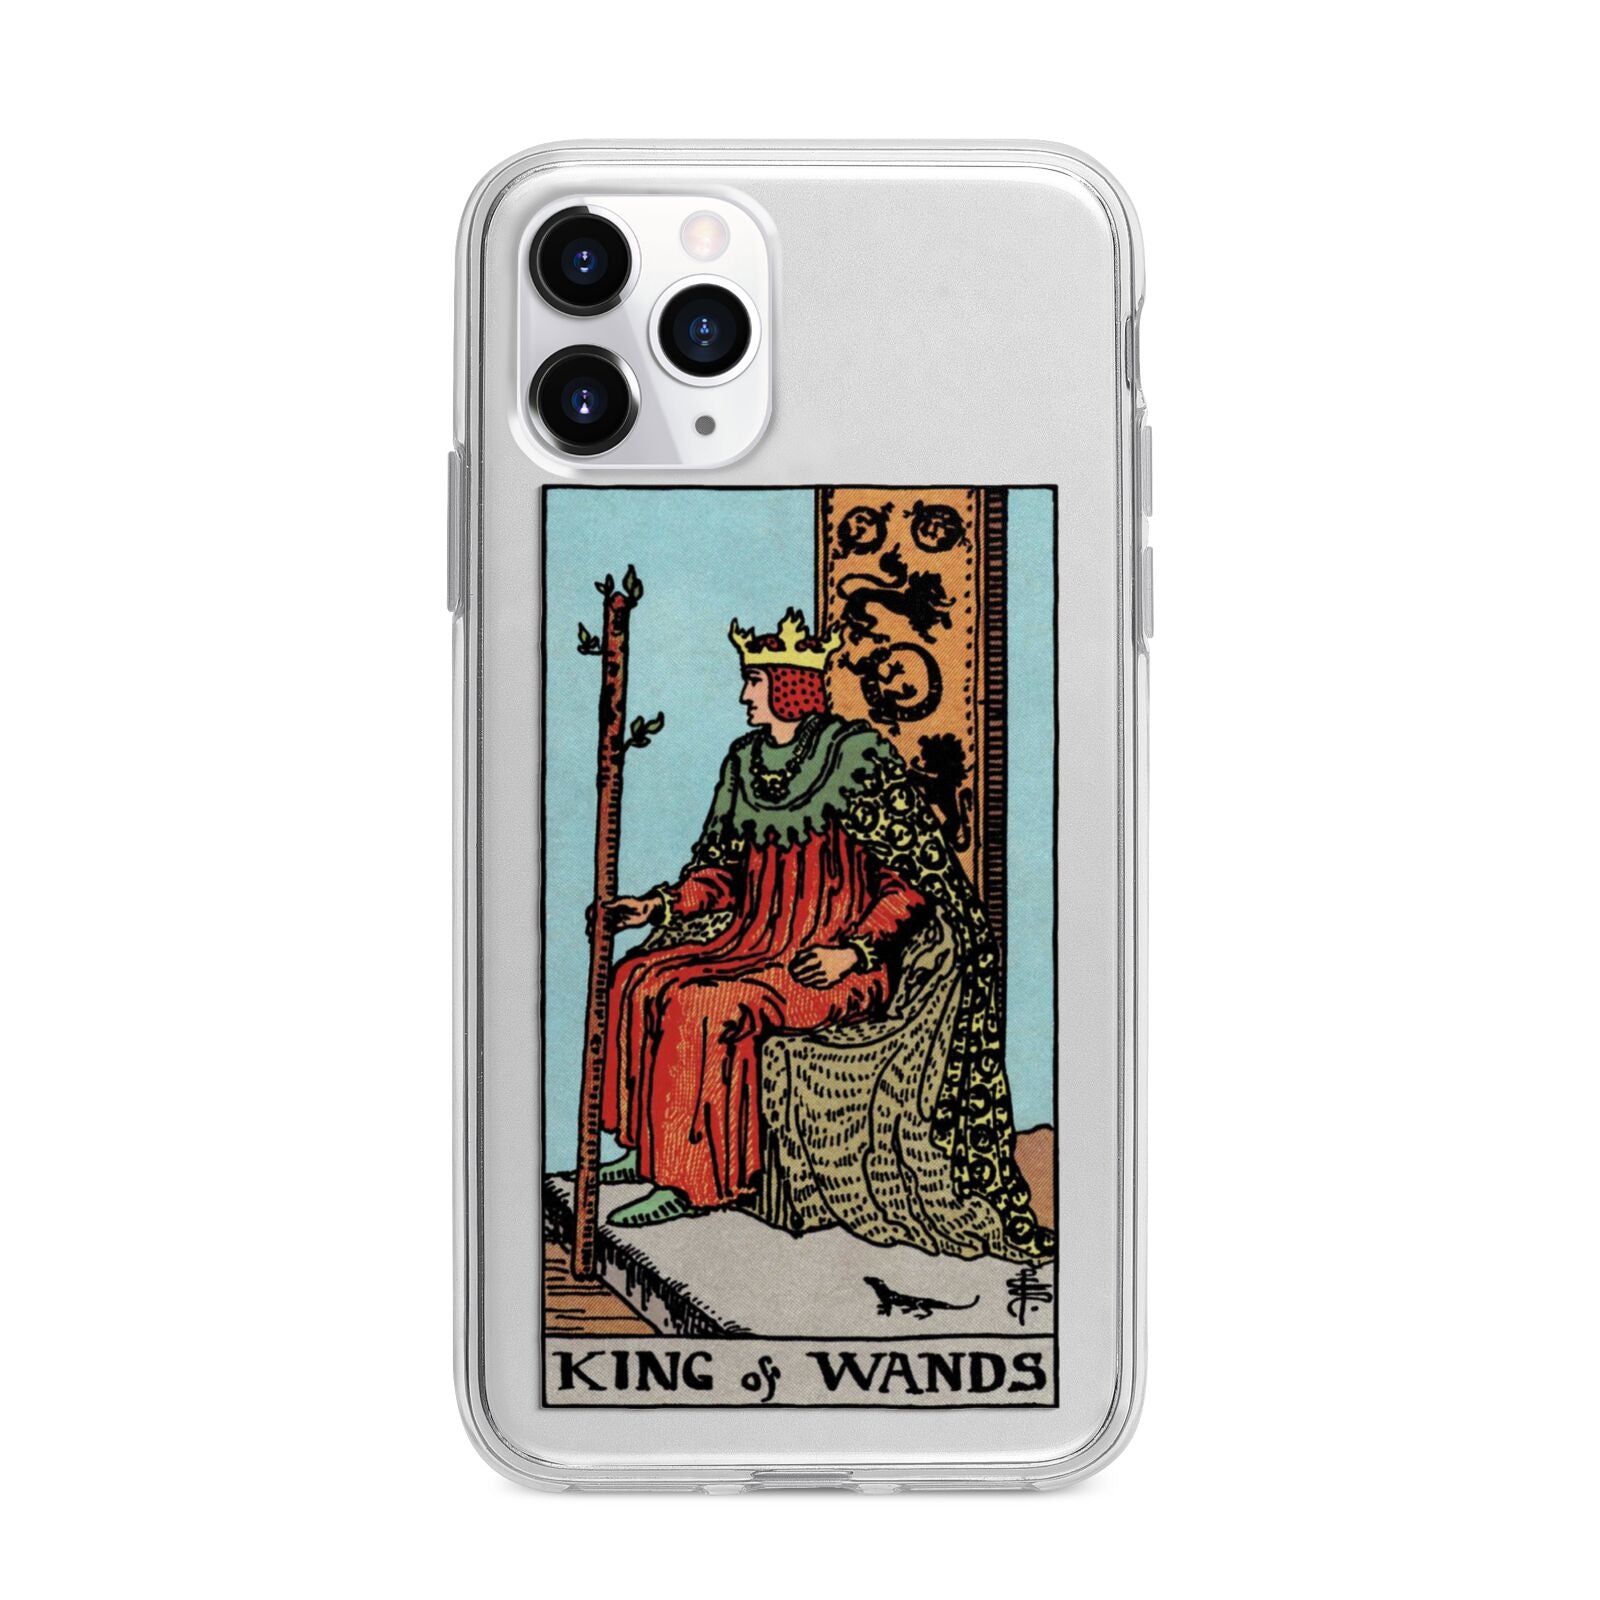 King of Wands Tarot Card Apple iPhone 11 Pro Max in Silver with Bumper Case